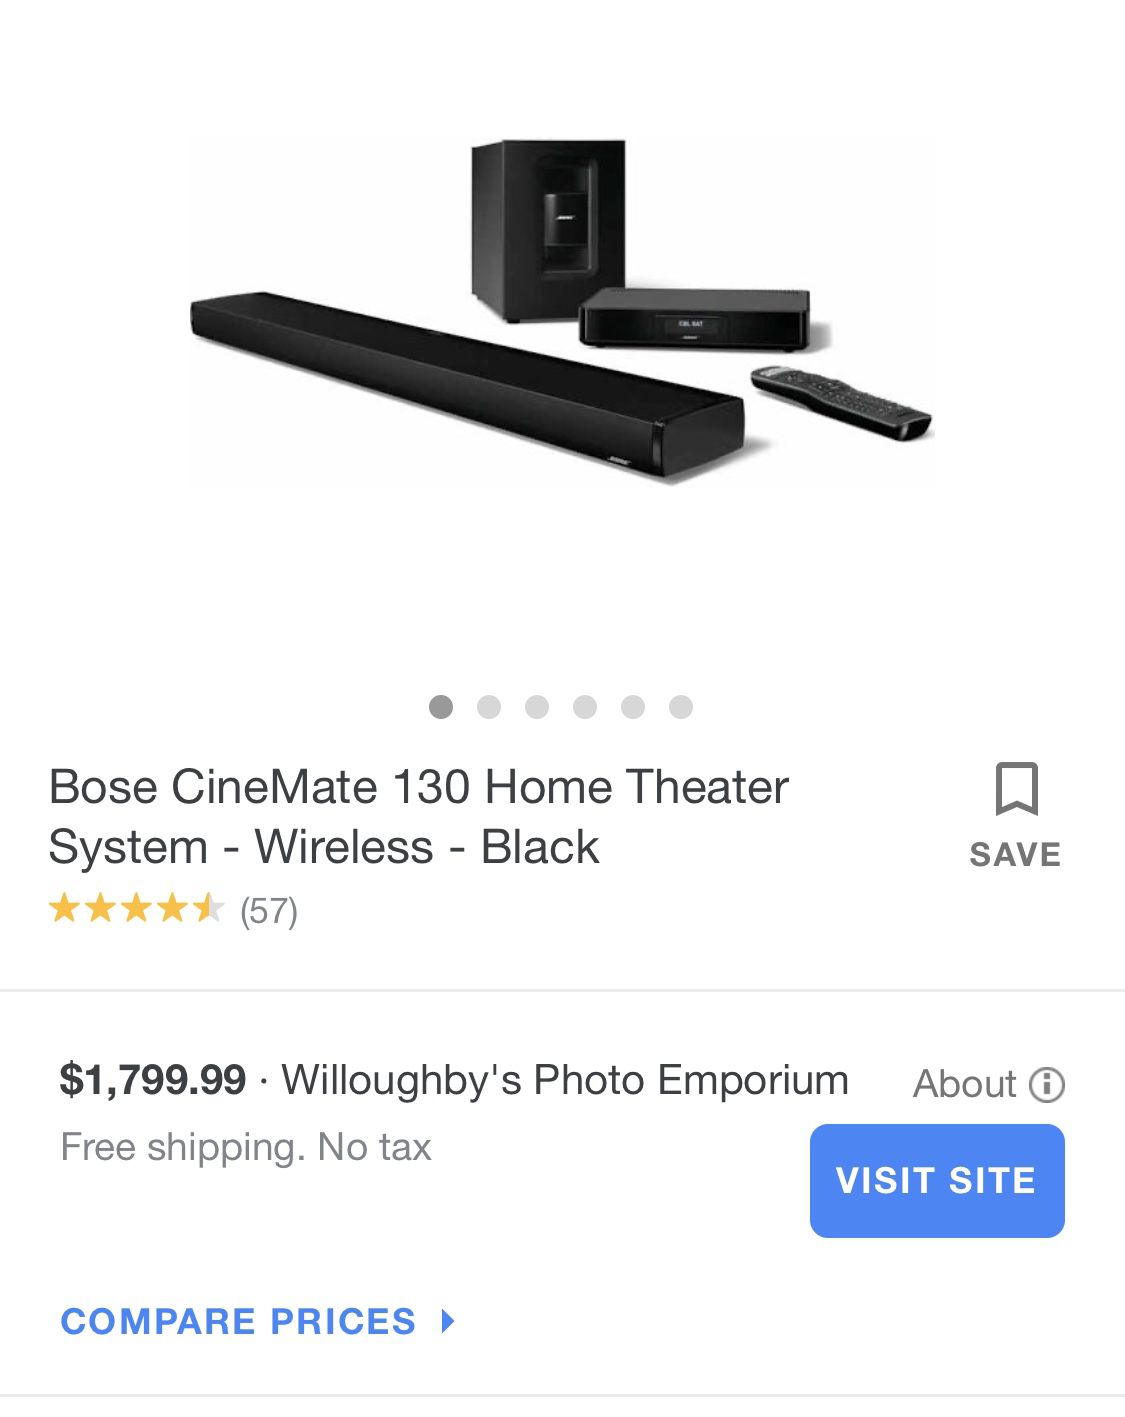 Bose Cinemate Home theater